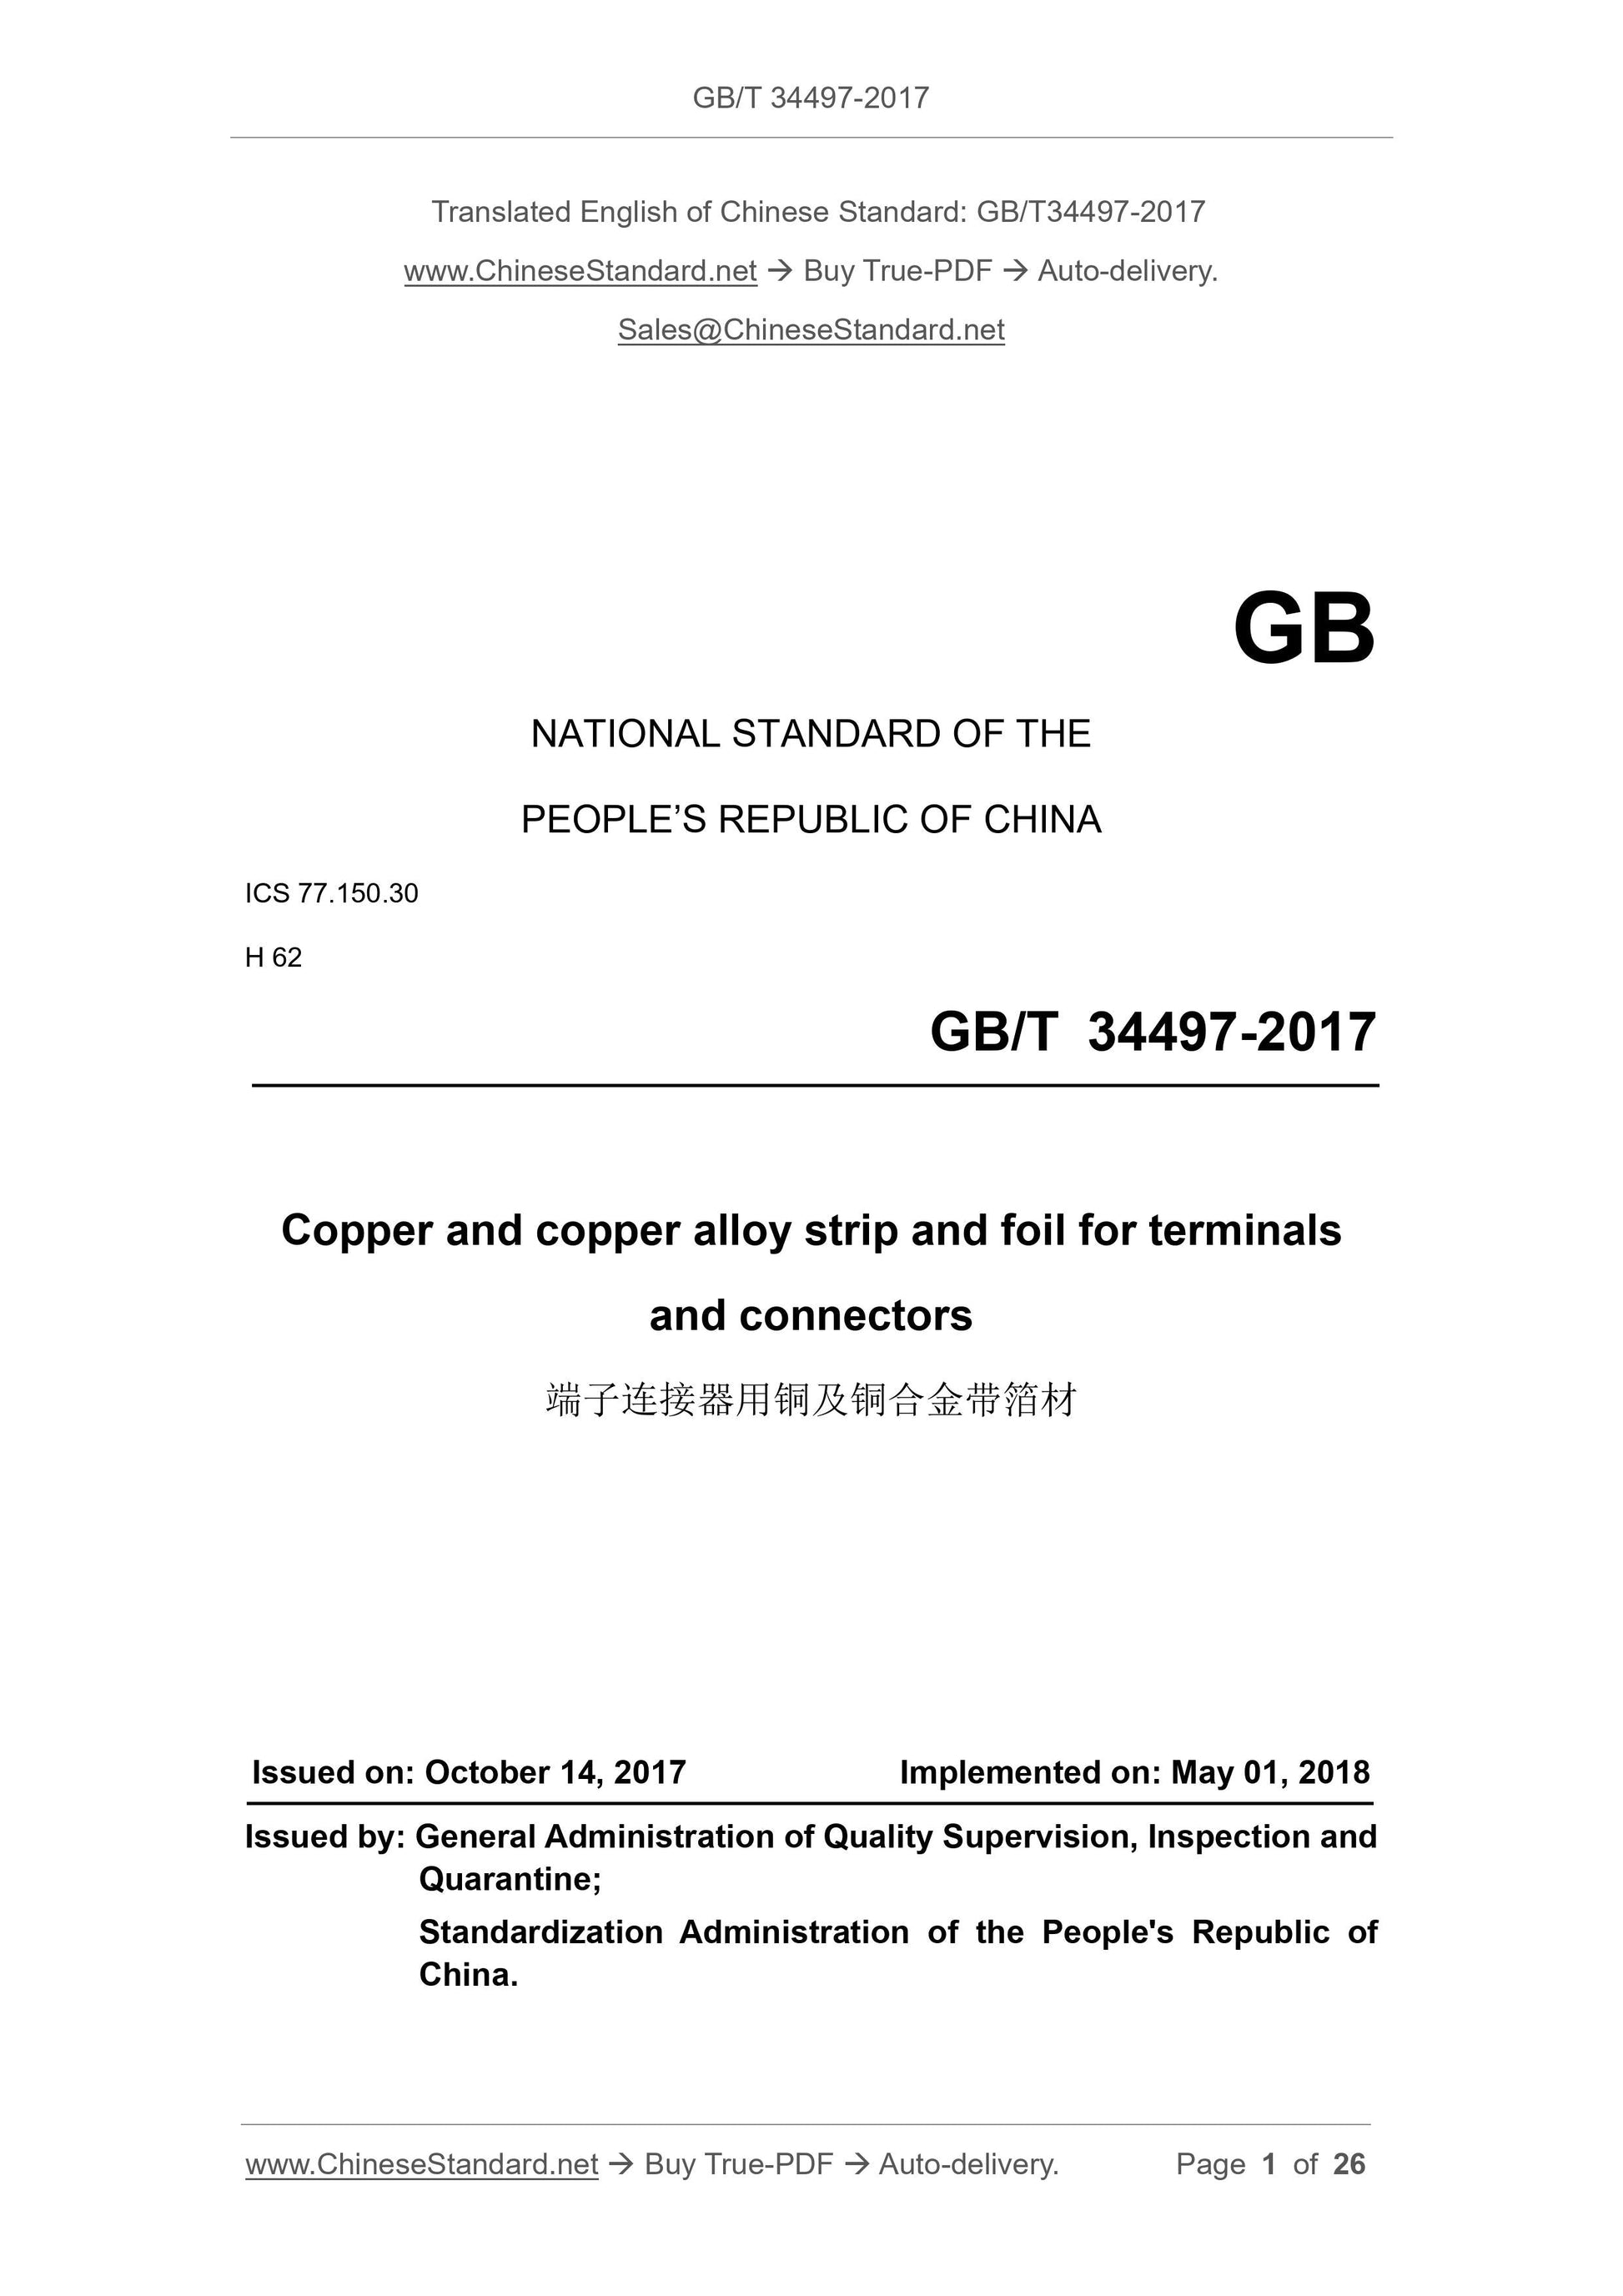 GB/T 34497-2017 Page 1